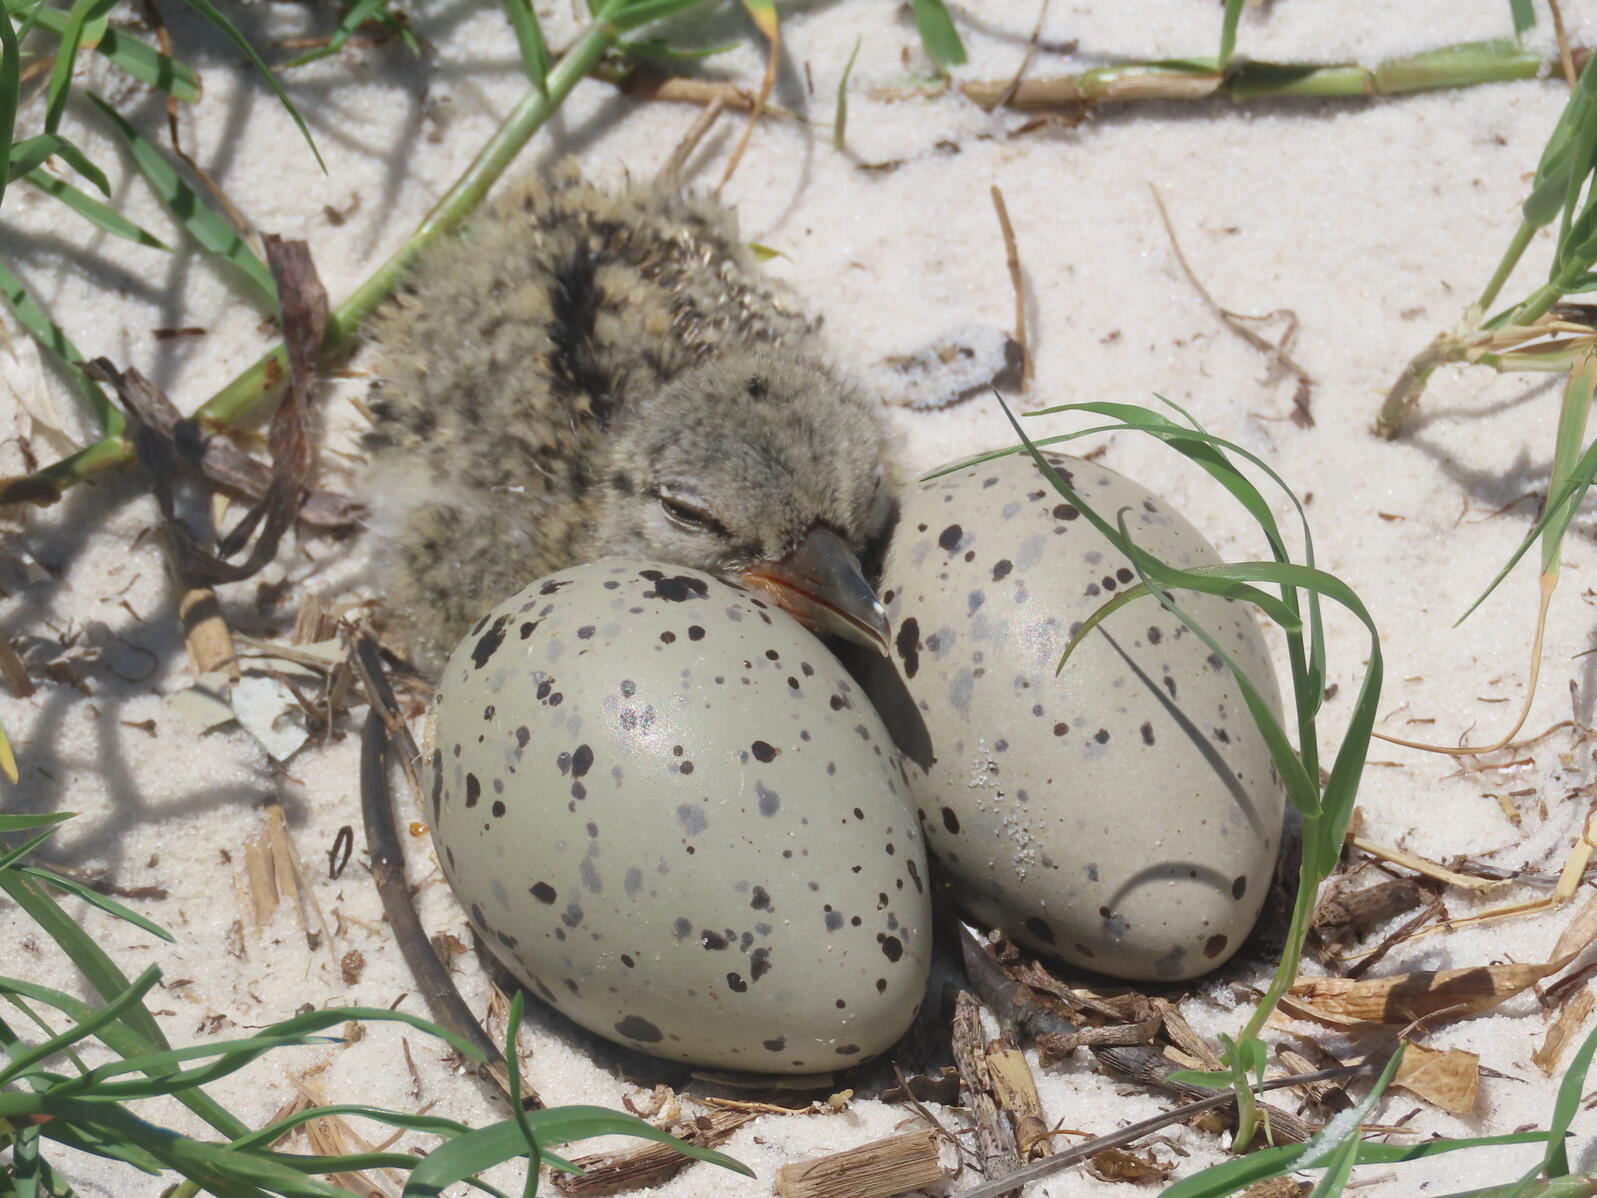 American Oystercatcher chick with two unhatched eggs.